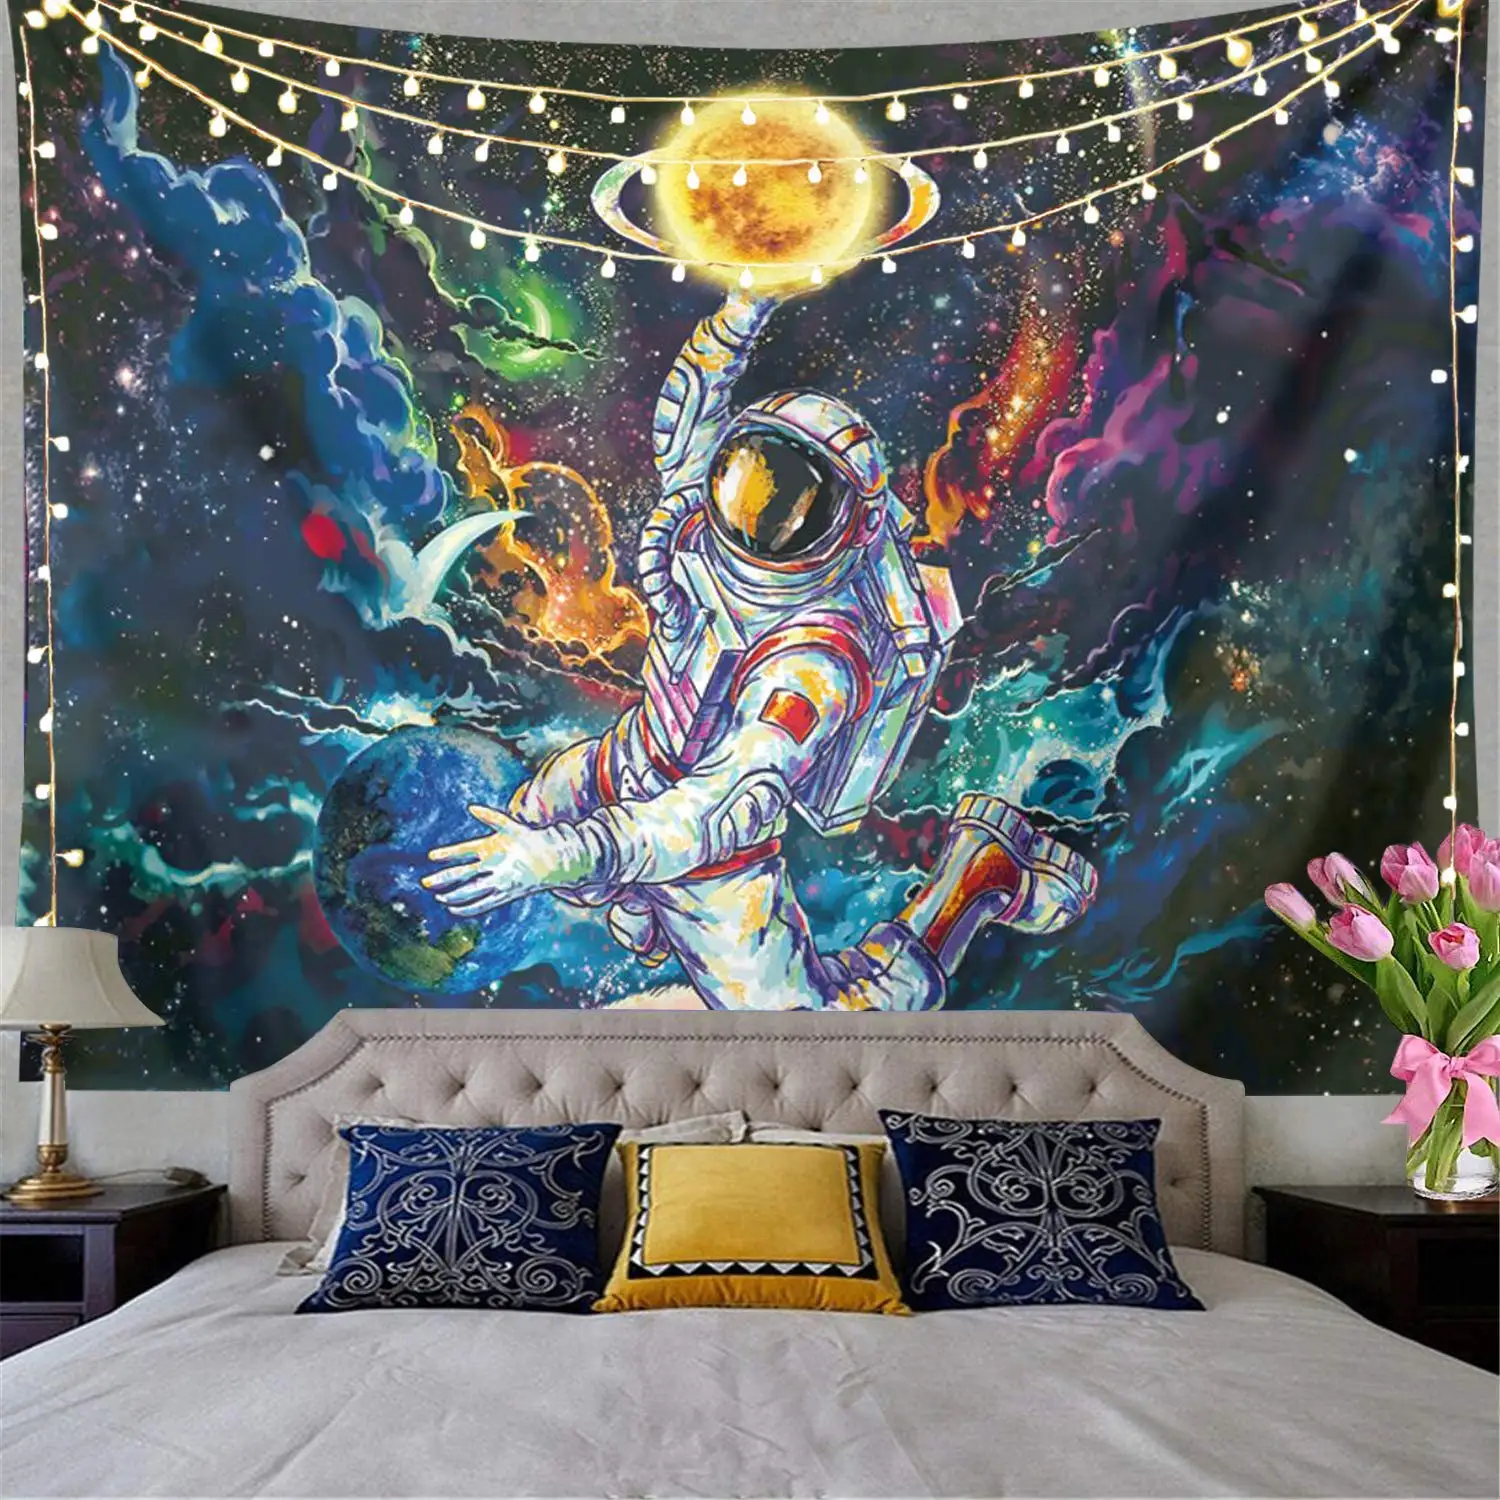 

Astronaut Tapestry Blacklight Space Tapestry Posters for College Dorm Decor Cool Spaceman on Fantasy Universe Planets Galaxy Sky